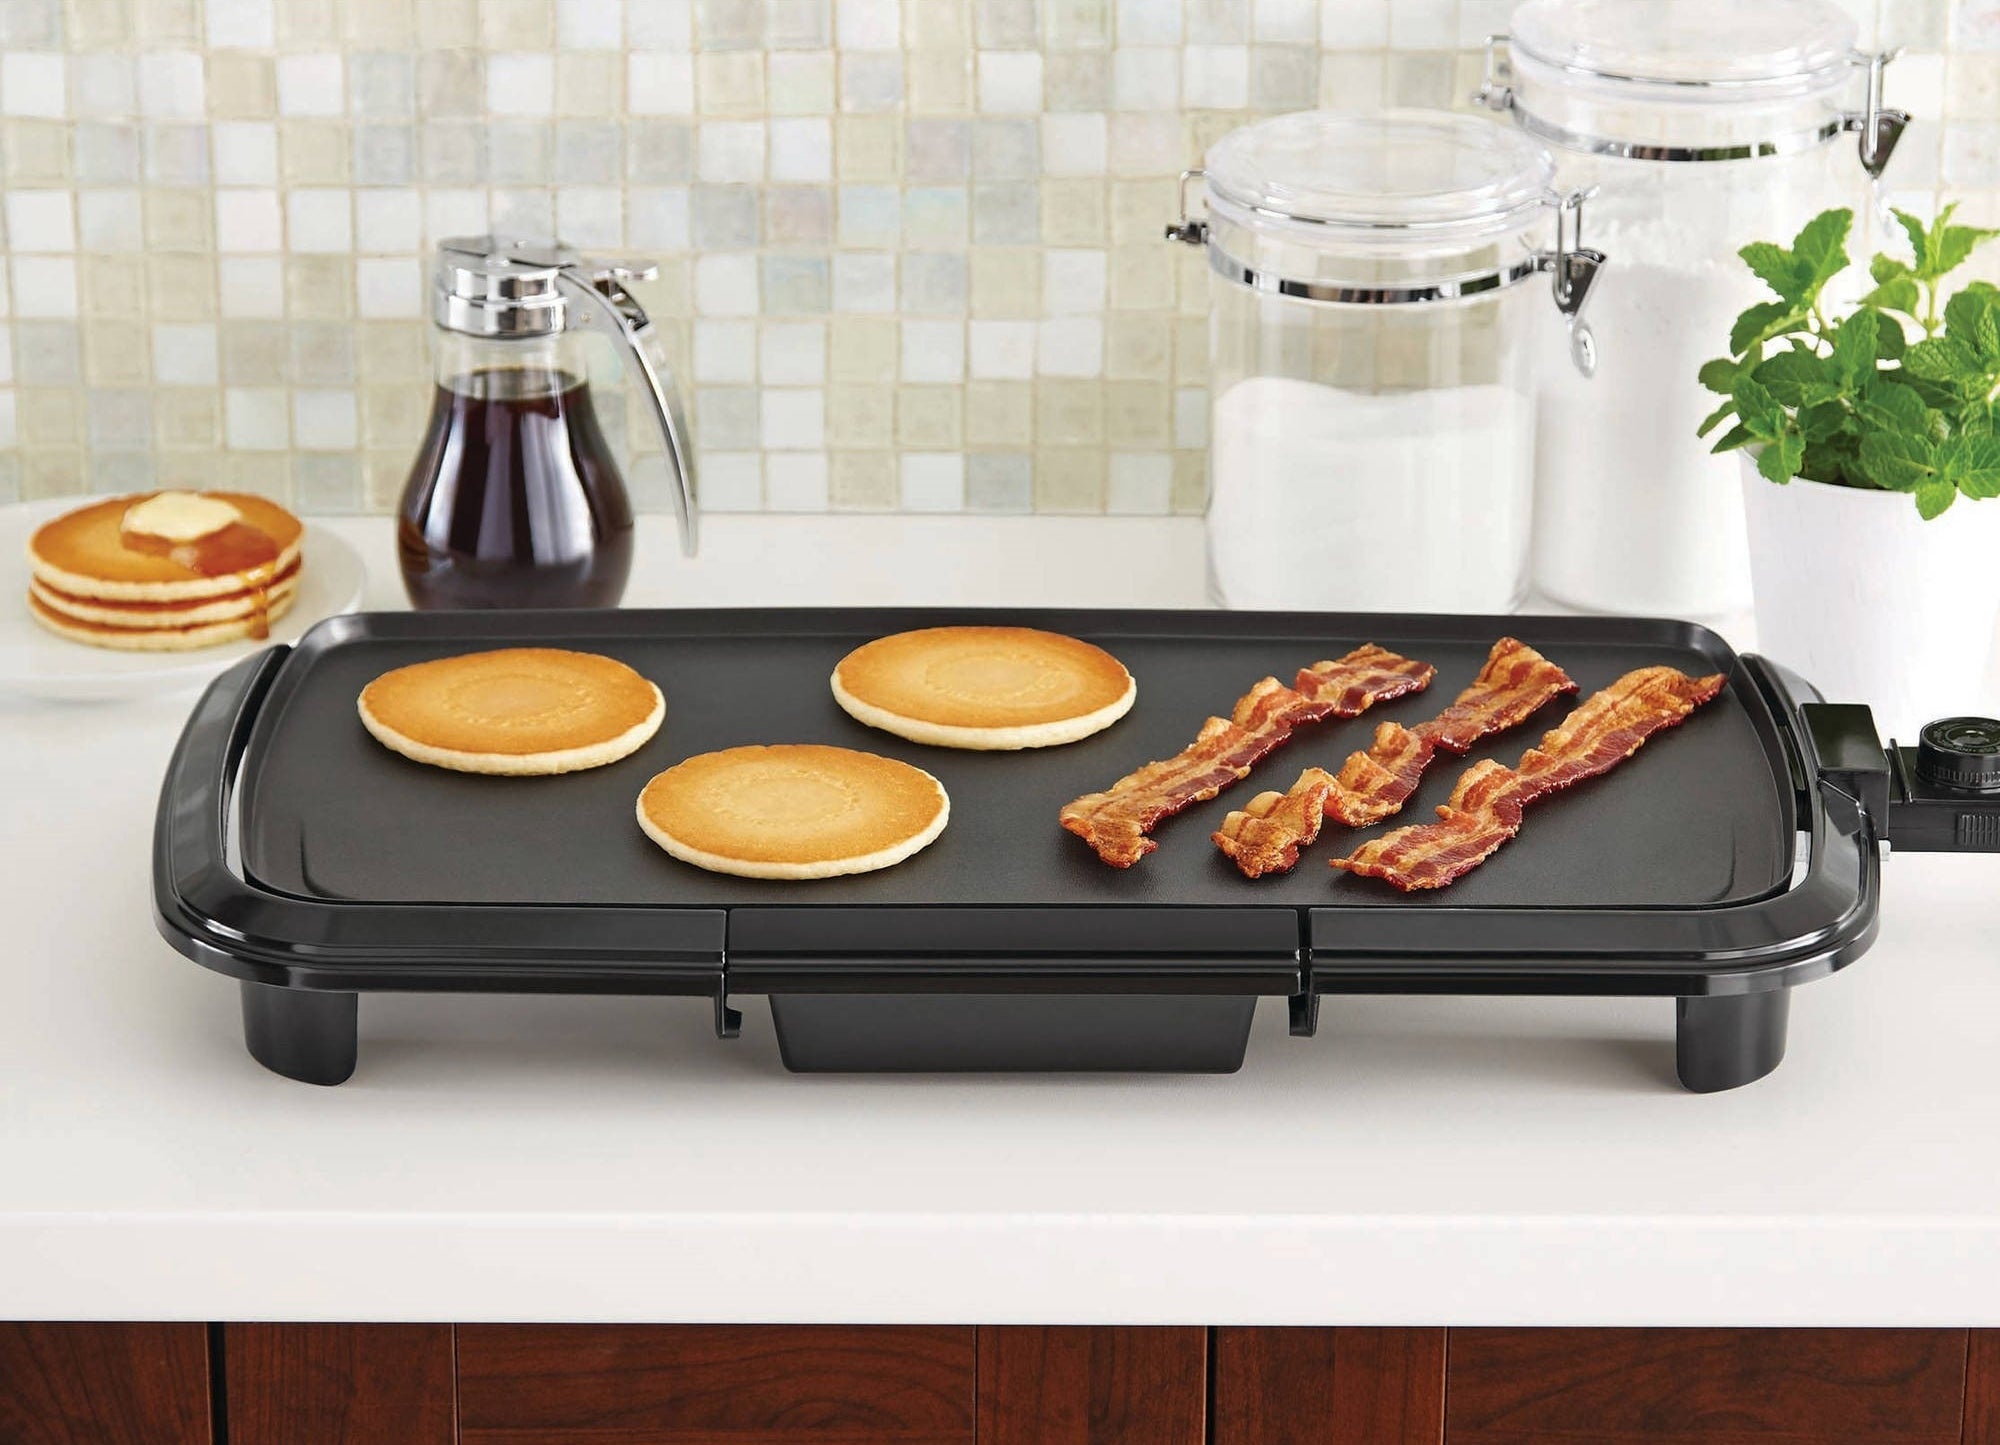 The black griddle with pancakes and bacon